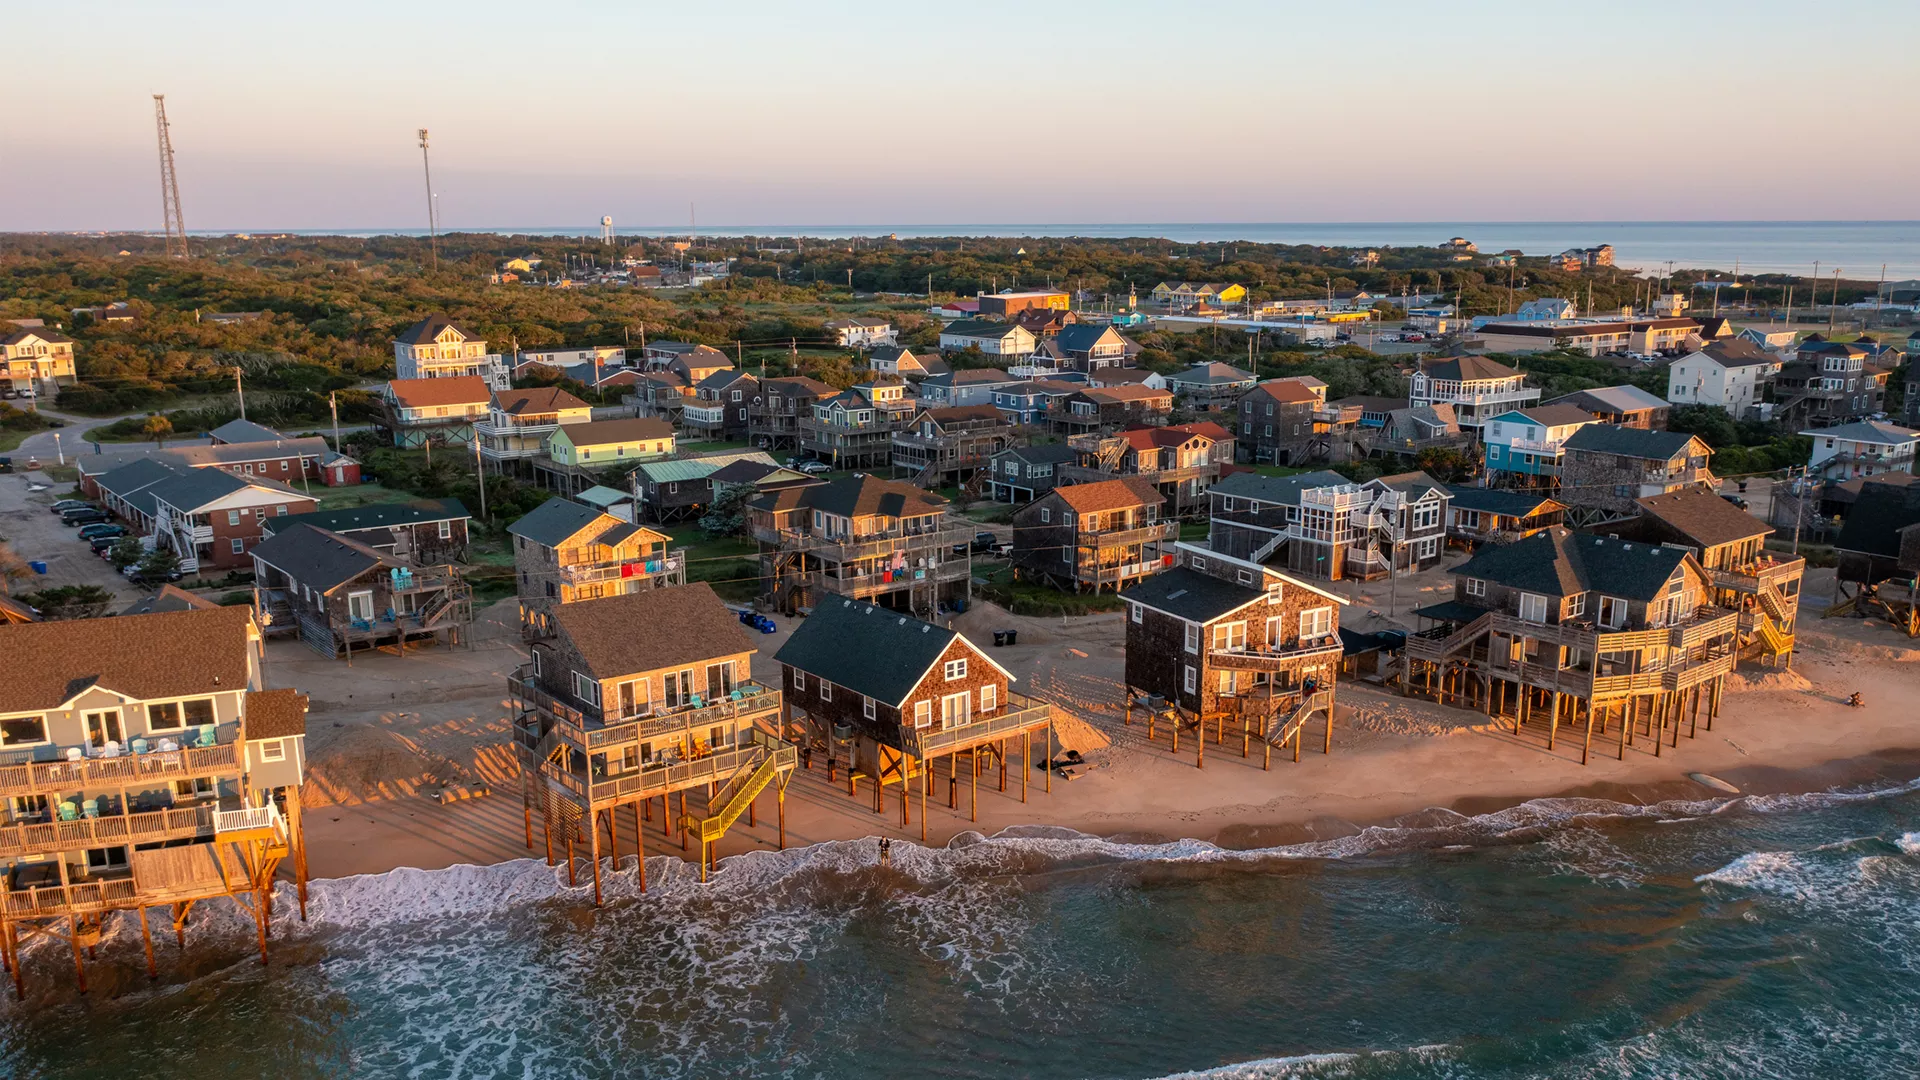 Image of a coast with houses on stilts during a sunset.